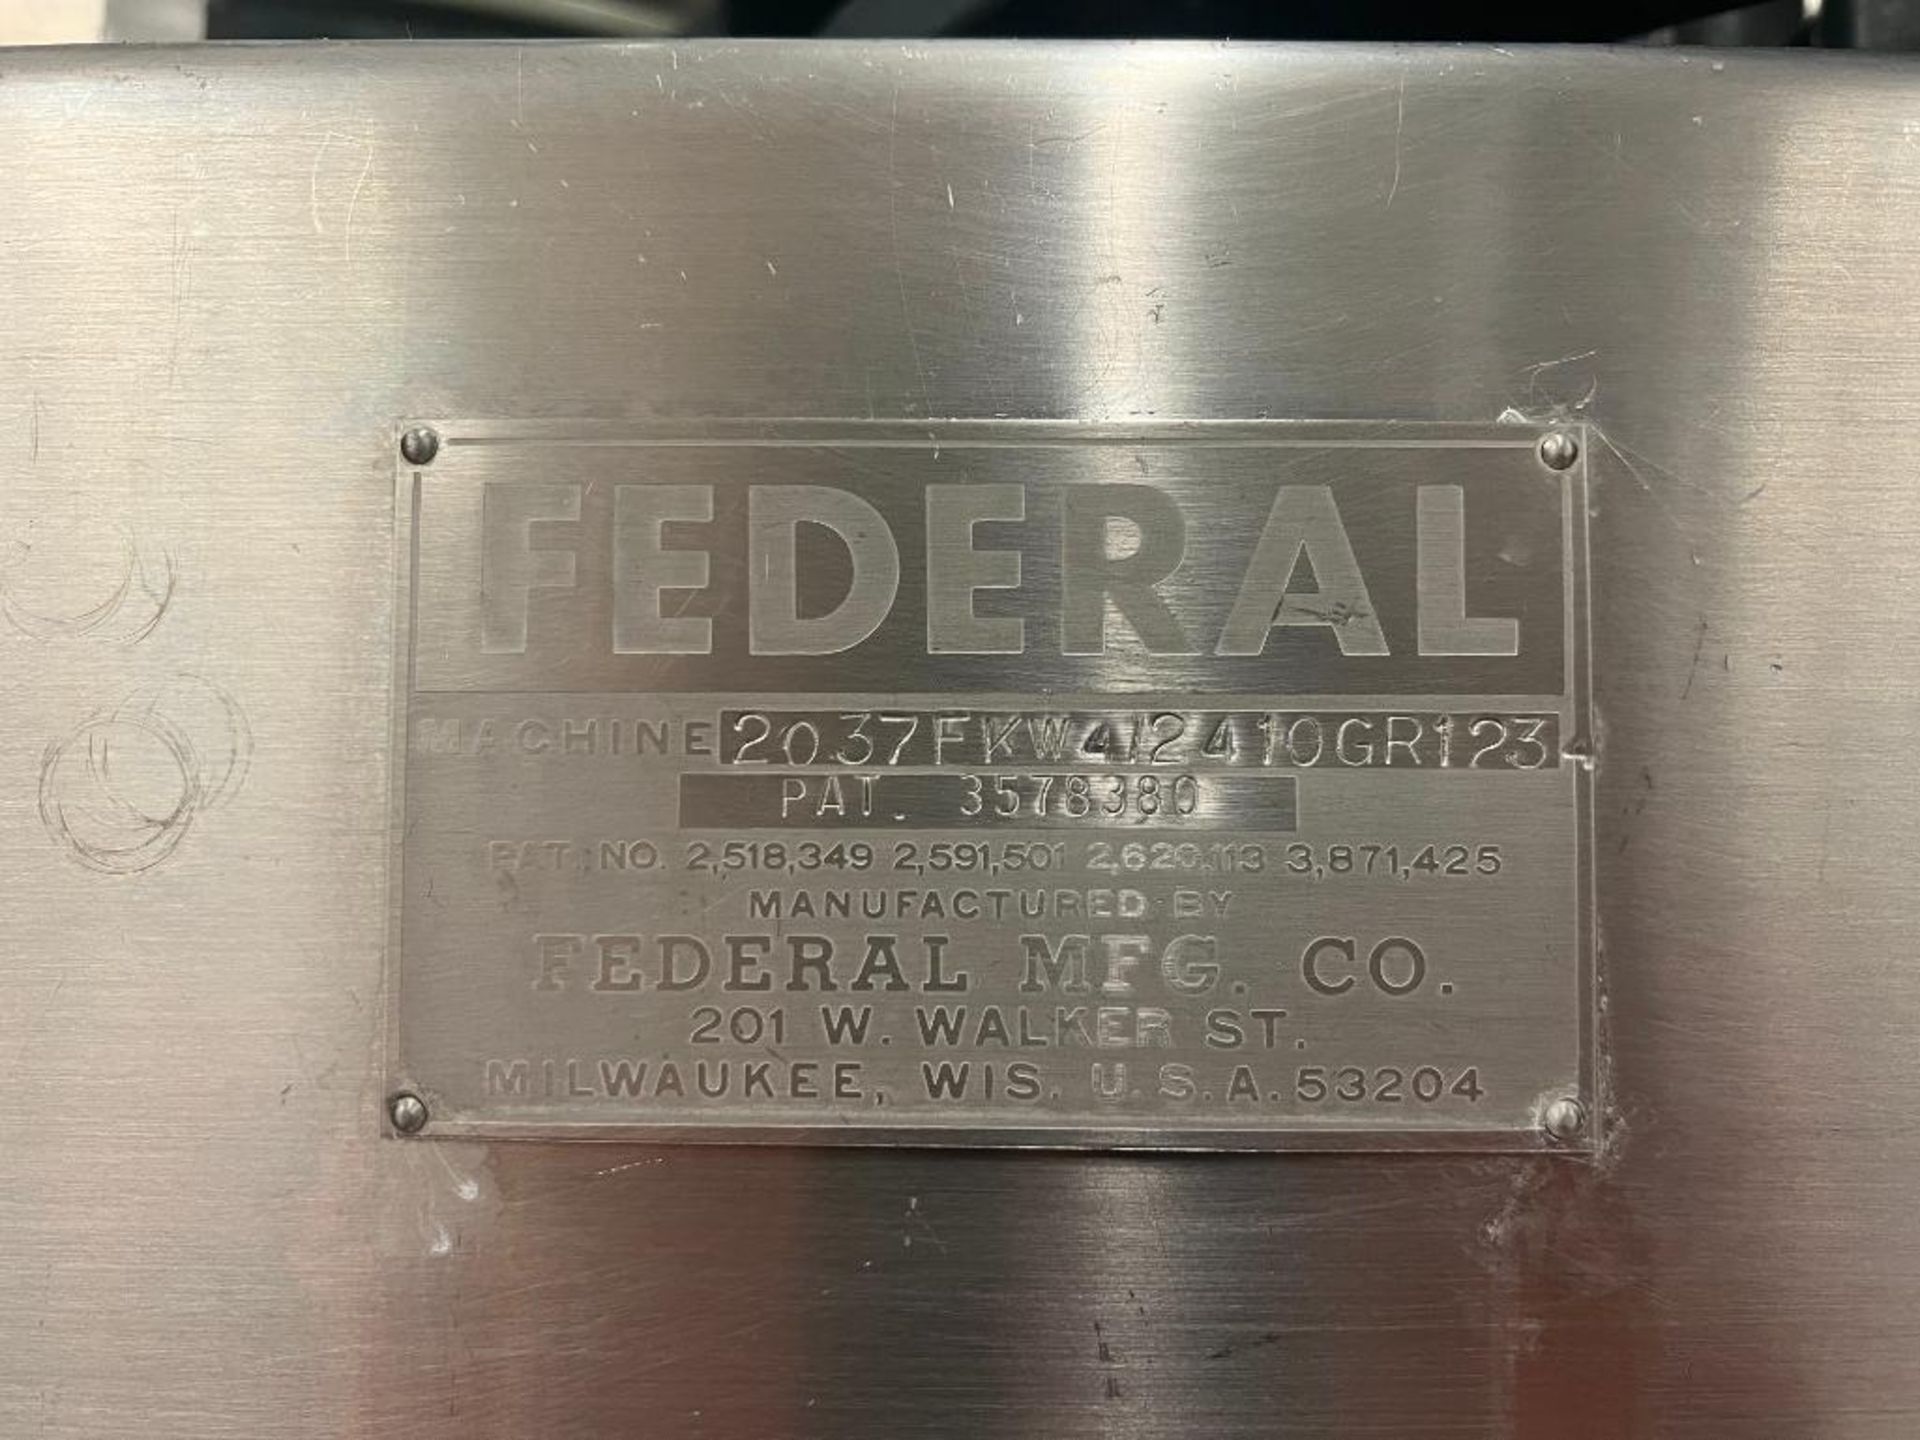 Federal 24-Valve Filler with 10-Head Capper, Machine No: 2037FKW4/2410GR1234 with Parker Touch - Image 4 of 17